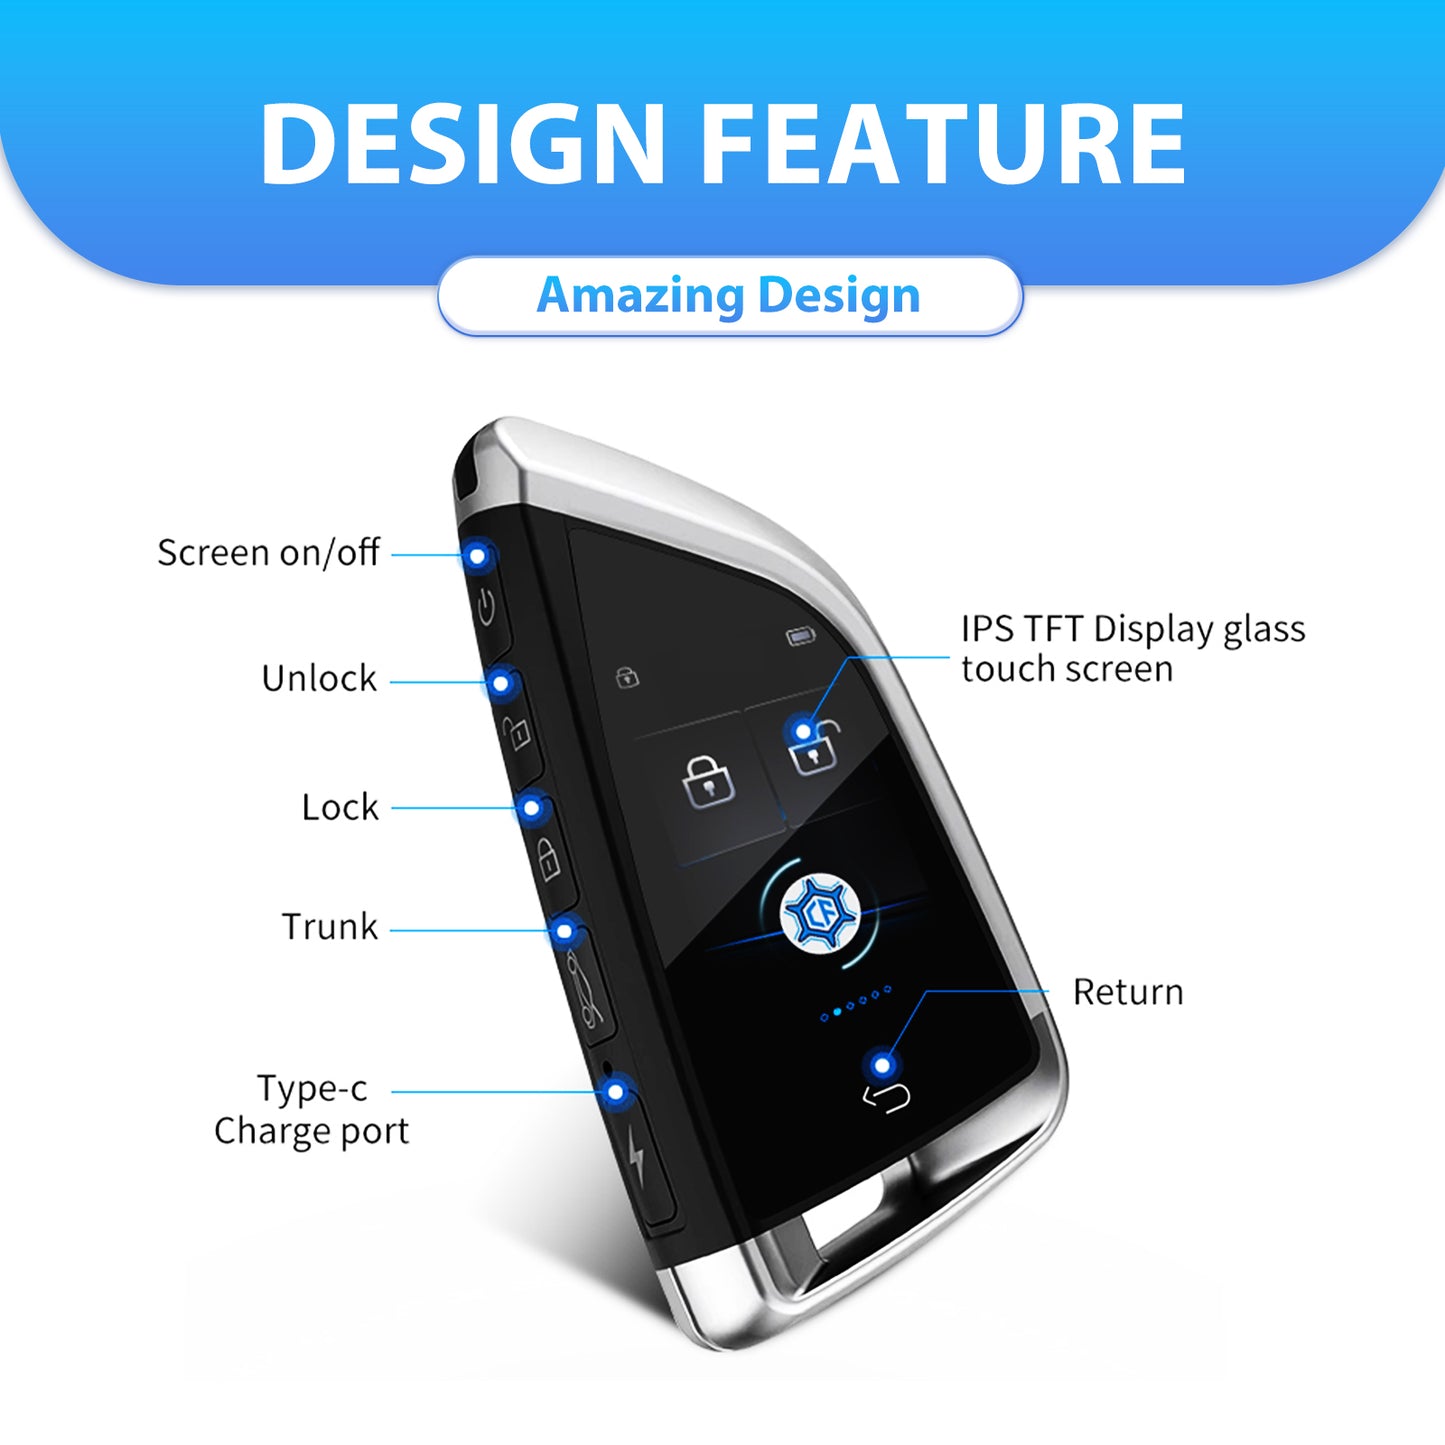 2022 New Arrival Smart touch screen remote universal control car key for Start Stop Cars